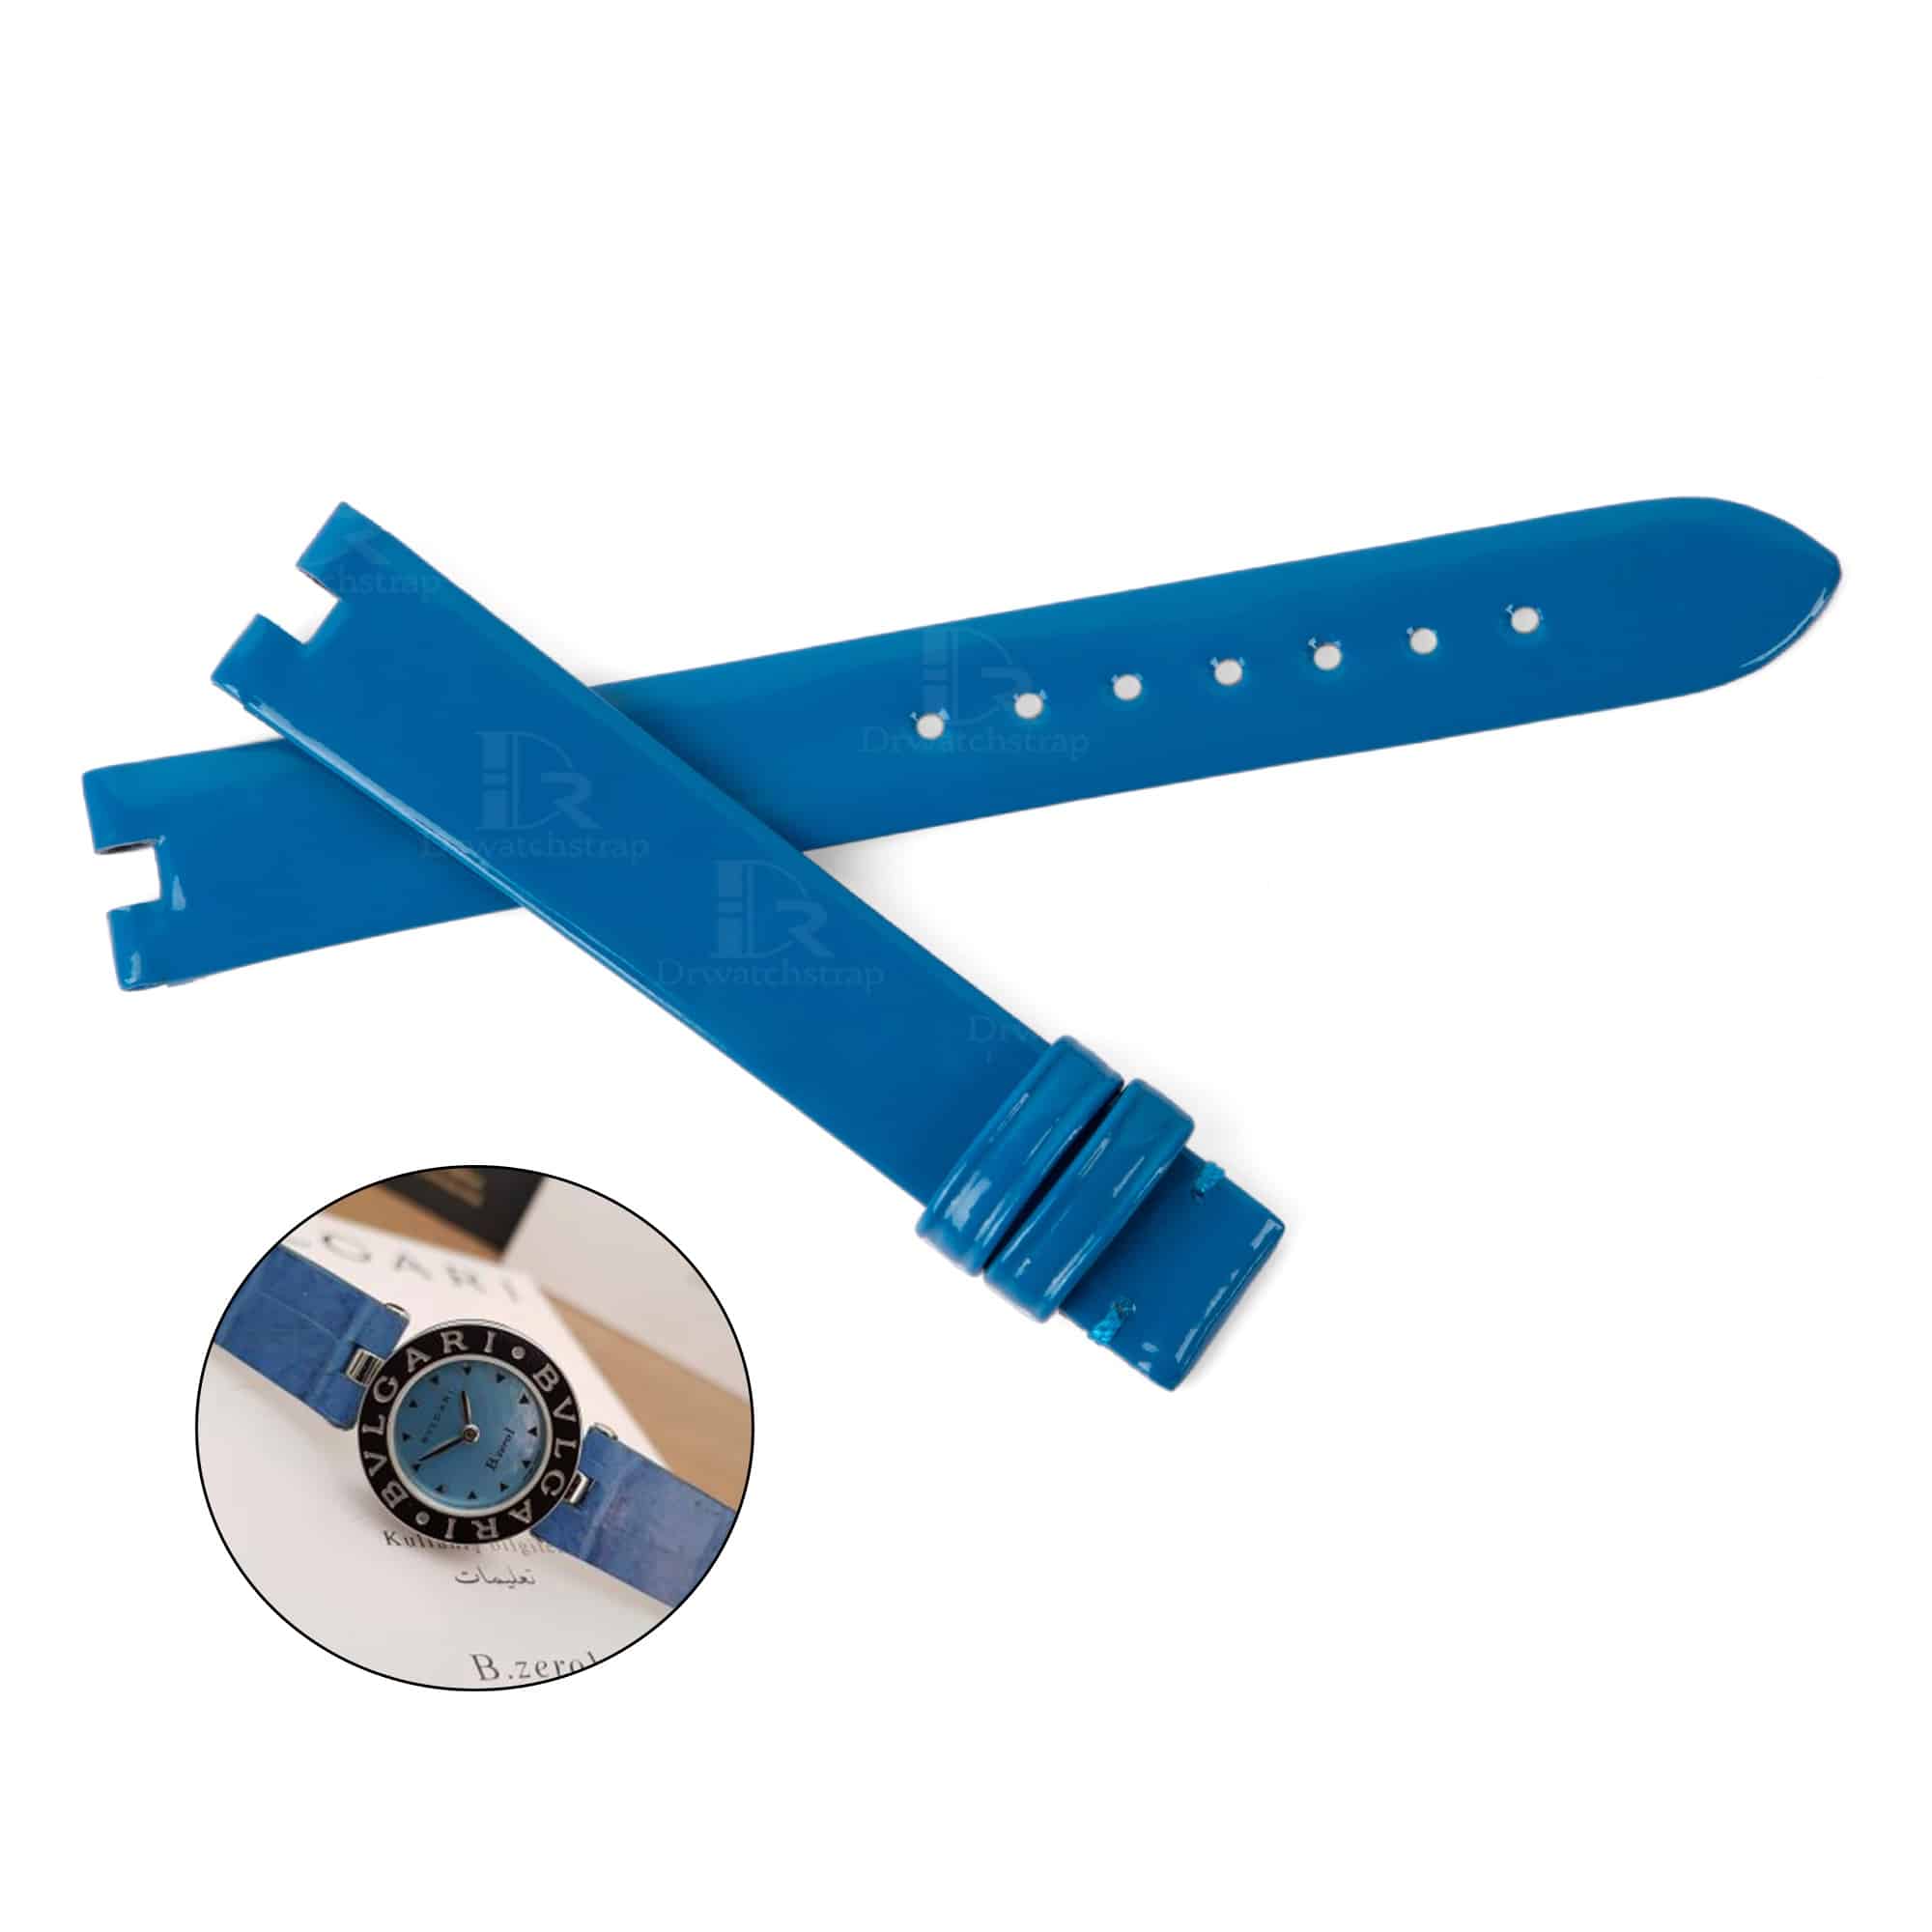 Custom afternarket best high-end quality blue satin leather Bulgari Bvlgari B.Zero1 watch band & watch strap replacement for Bvlgari luxury mens women watches - Shop the premium satin material straps and wrist bands for sale low price from dr watchstrap